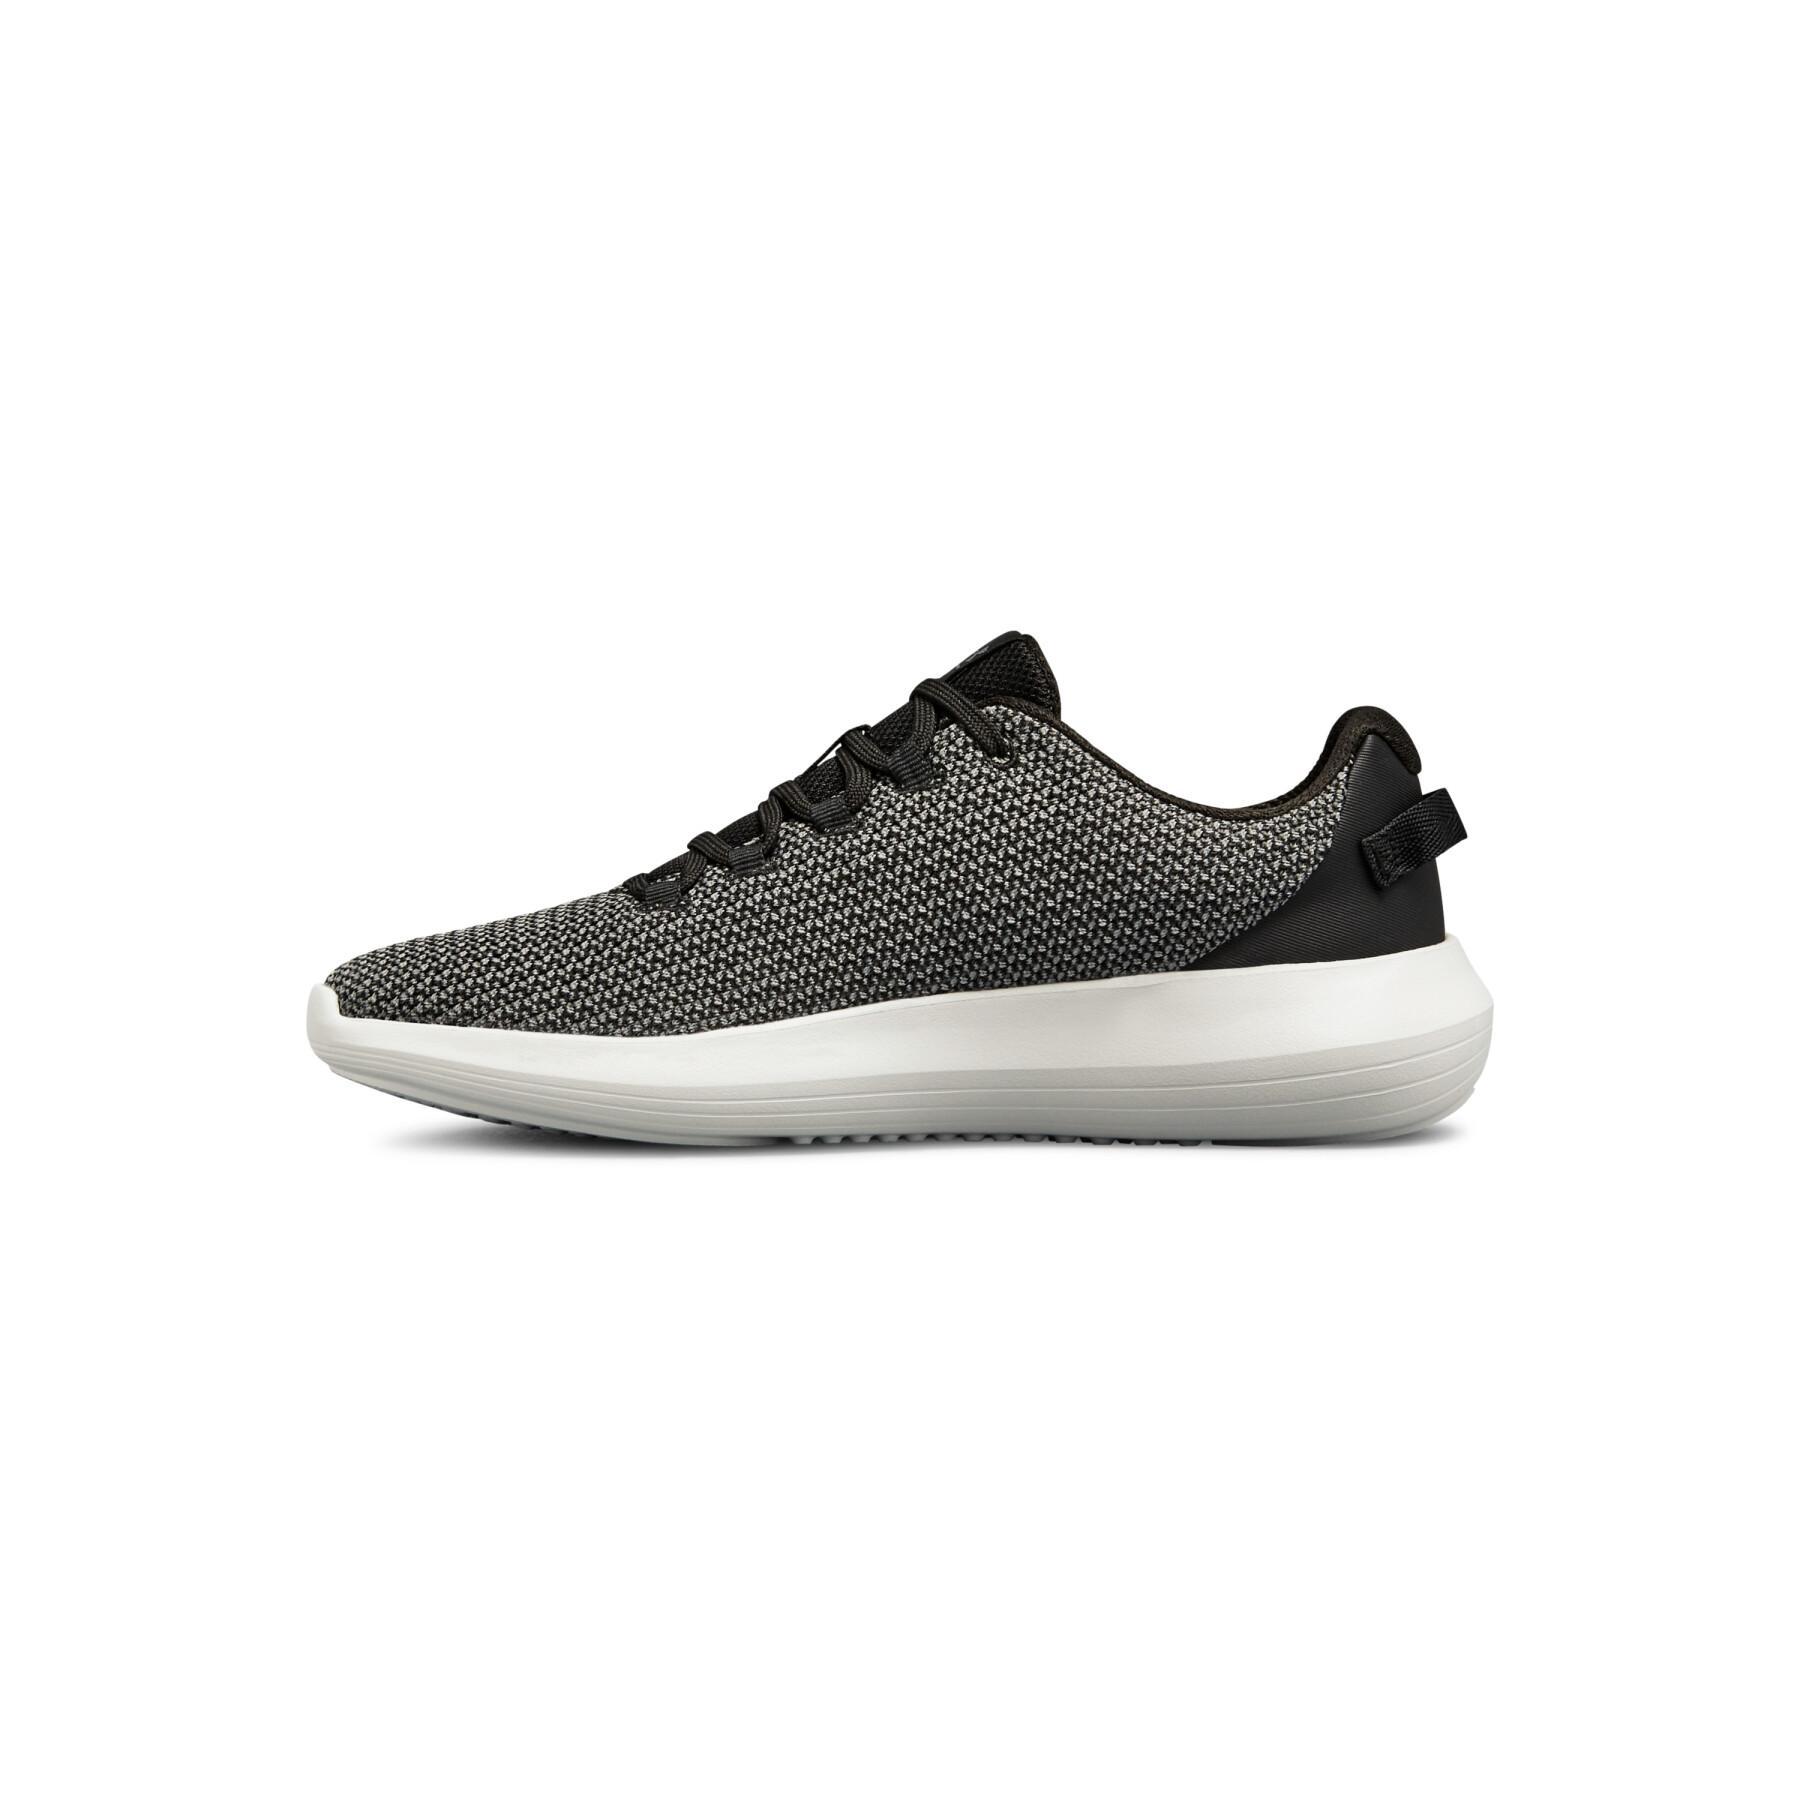 Women's shoes Under Armour Ripple Sportstyle